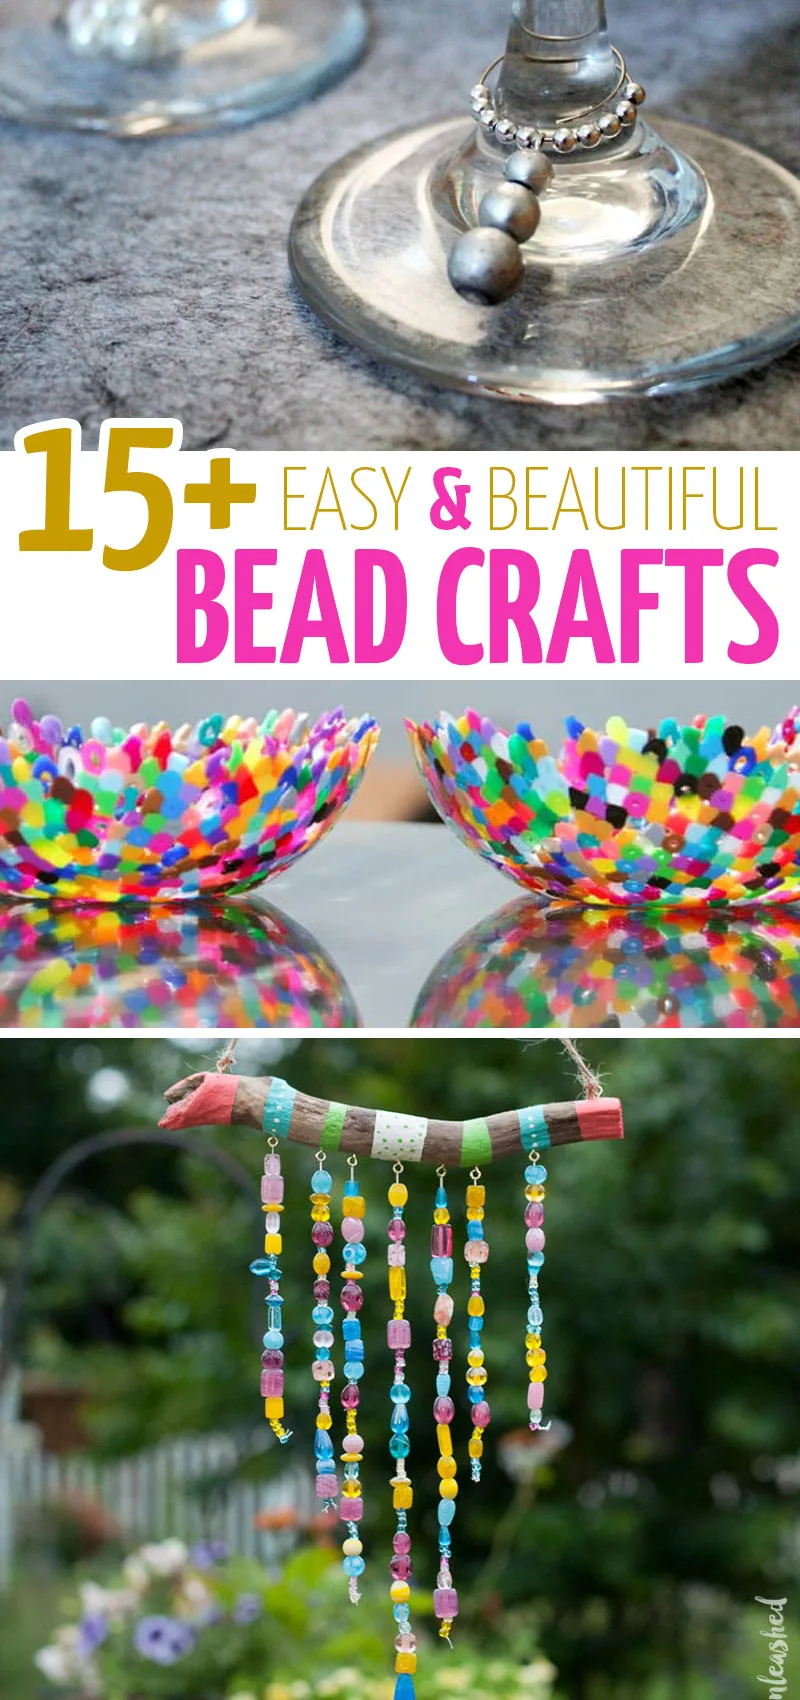 Click for loads of cool bead crafts for kids and adults! These cool things to make with beads include jewelry making crafts for beginners, beaded home decor ideas, and more!